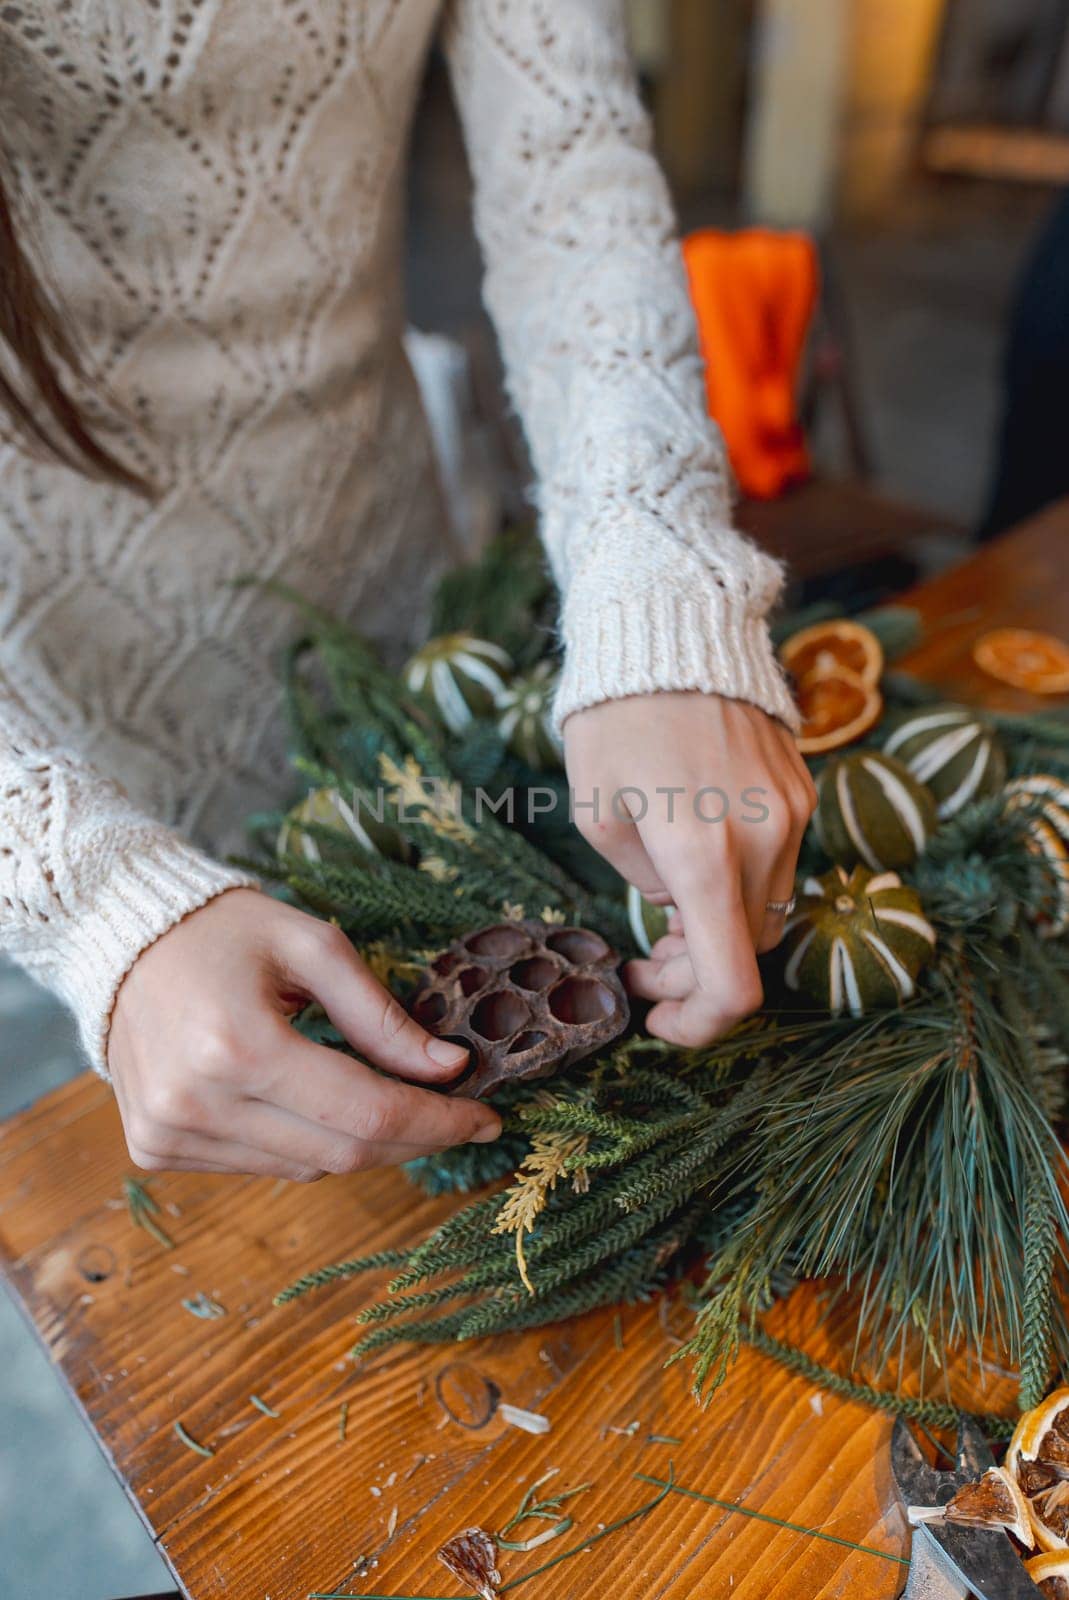 Crafting session teaching how to make Christmas wreaths and New Year's decor. by teksomolika